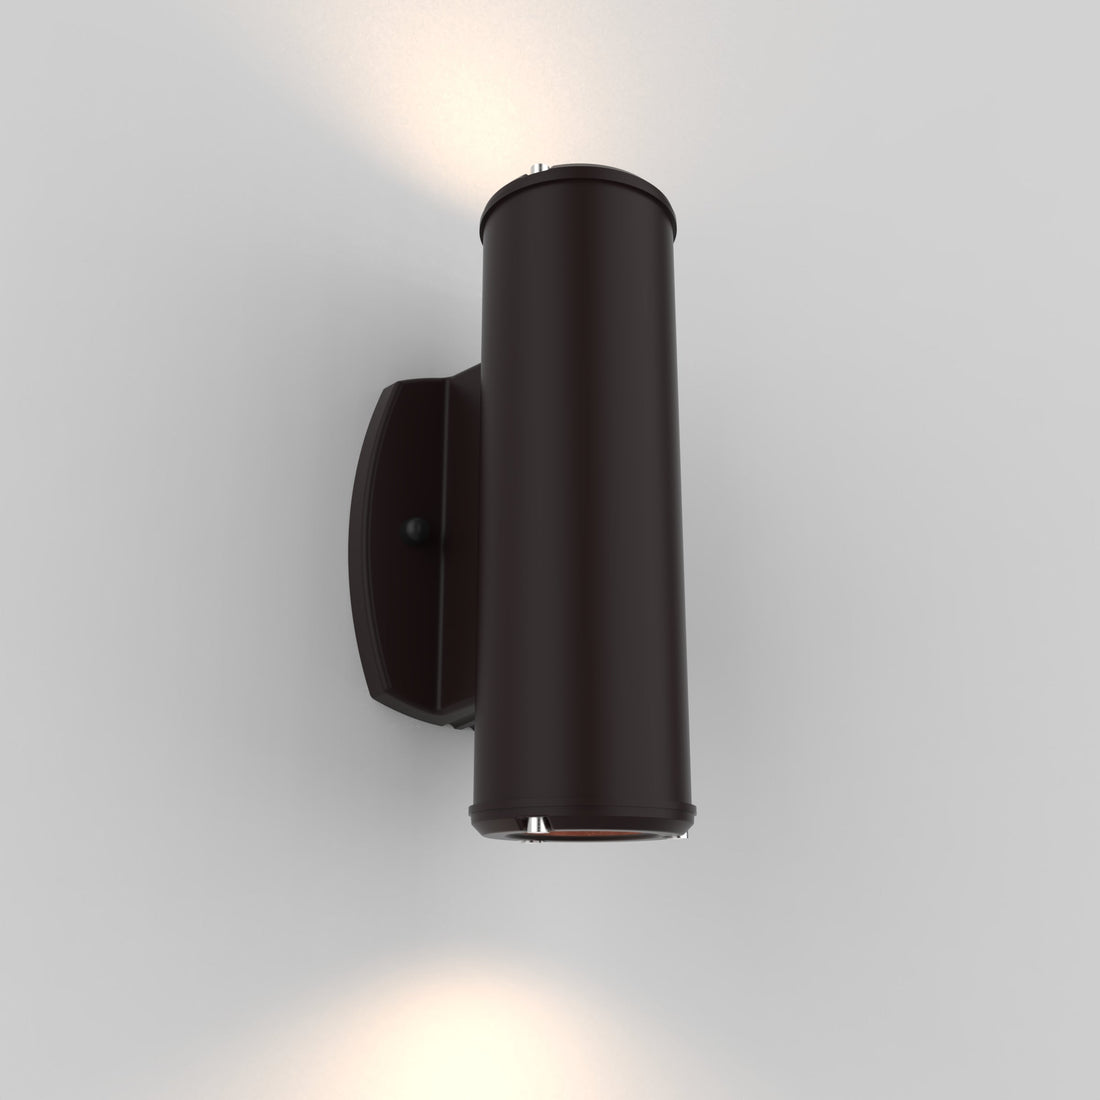 Evolution • Cylindrical wall light with integrated LED for exteriors [1828]